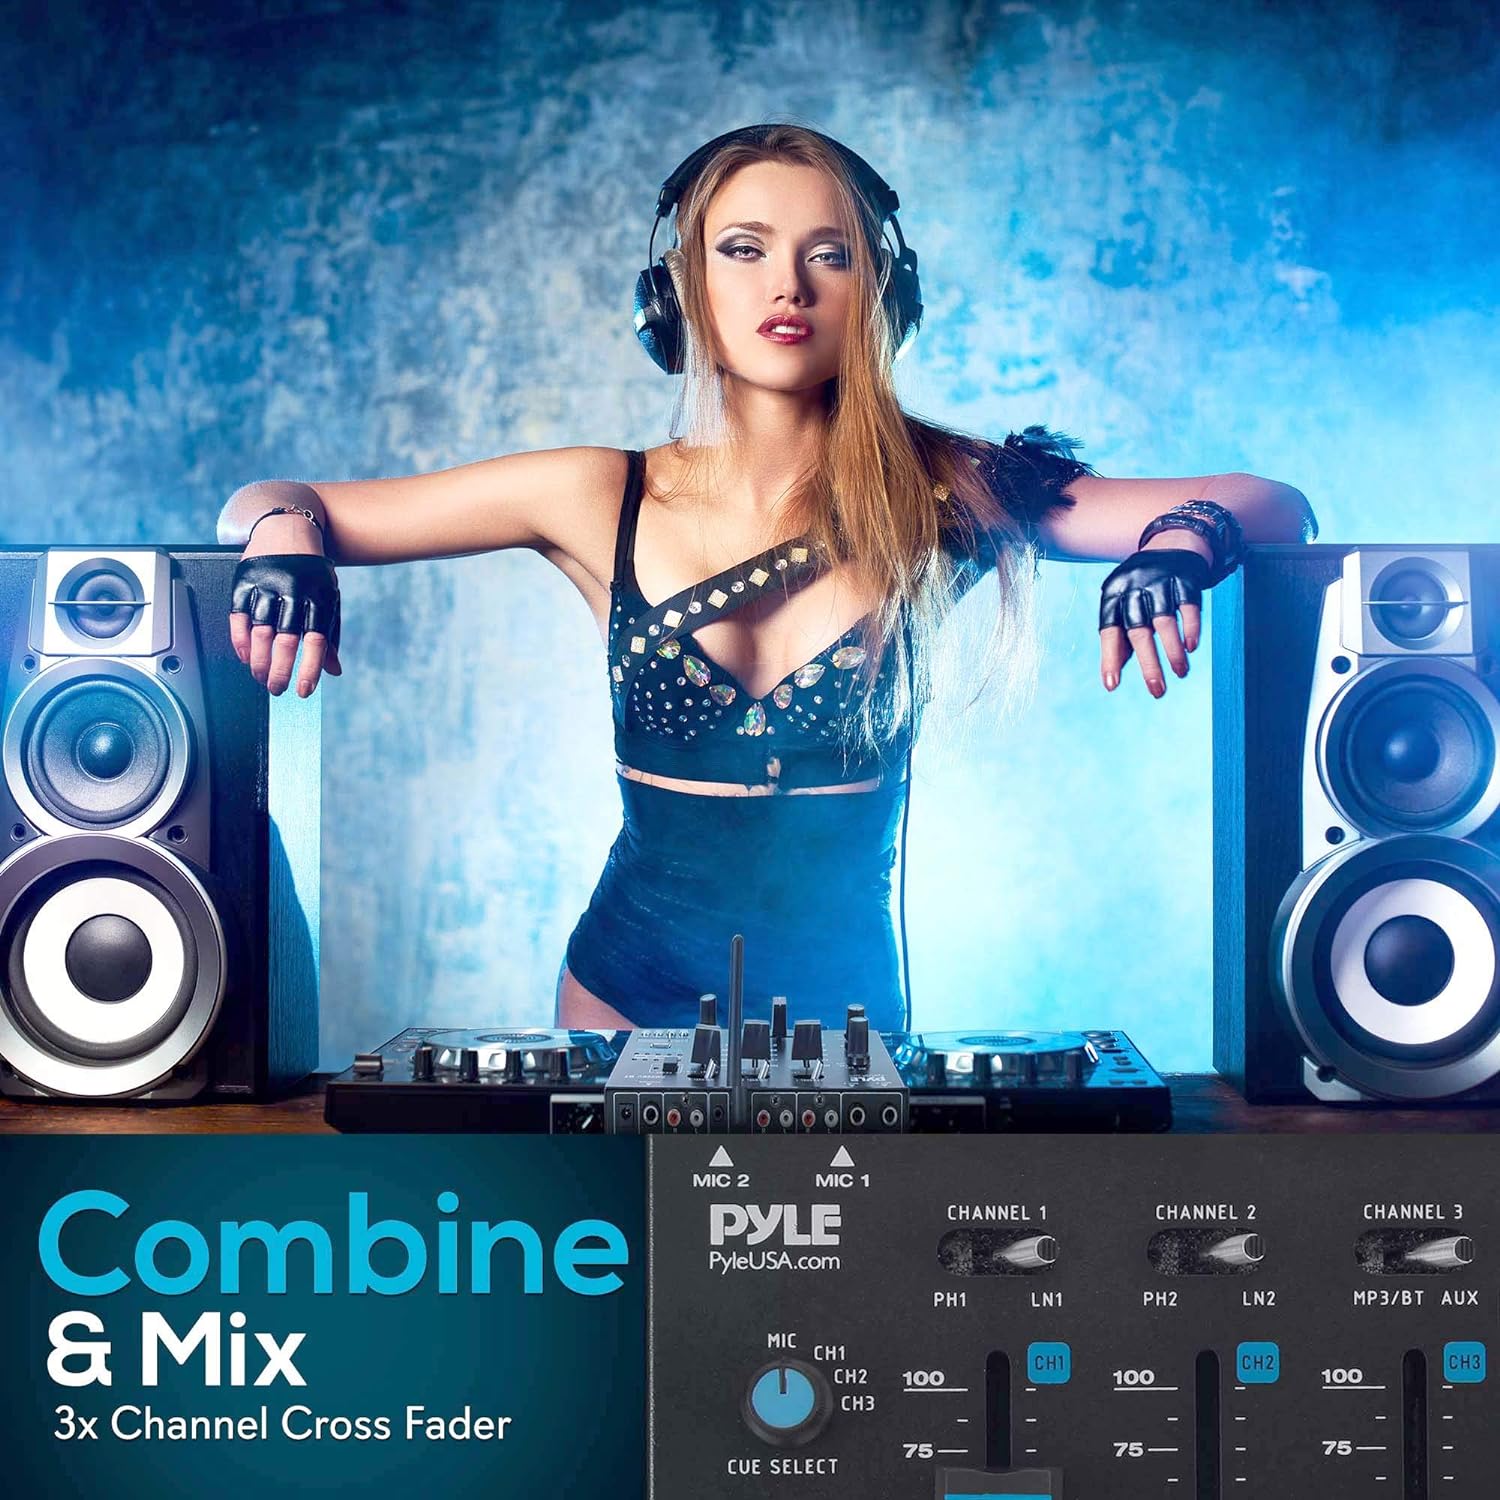 Wireless DJ Audio Mixer - 3 Channel Bluetooth Compatible DJ Controller Sound Mixer, Mic-Talkover, USB Reader, Dual RCA Phono/Line in, Microphone Input, Headphone Jack - Pyle PMX8BU